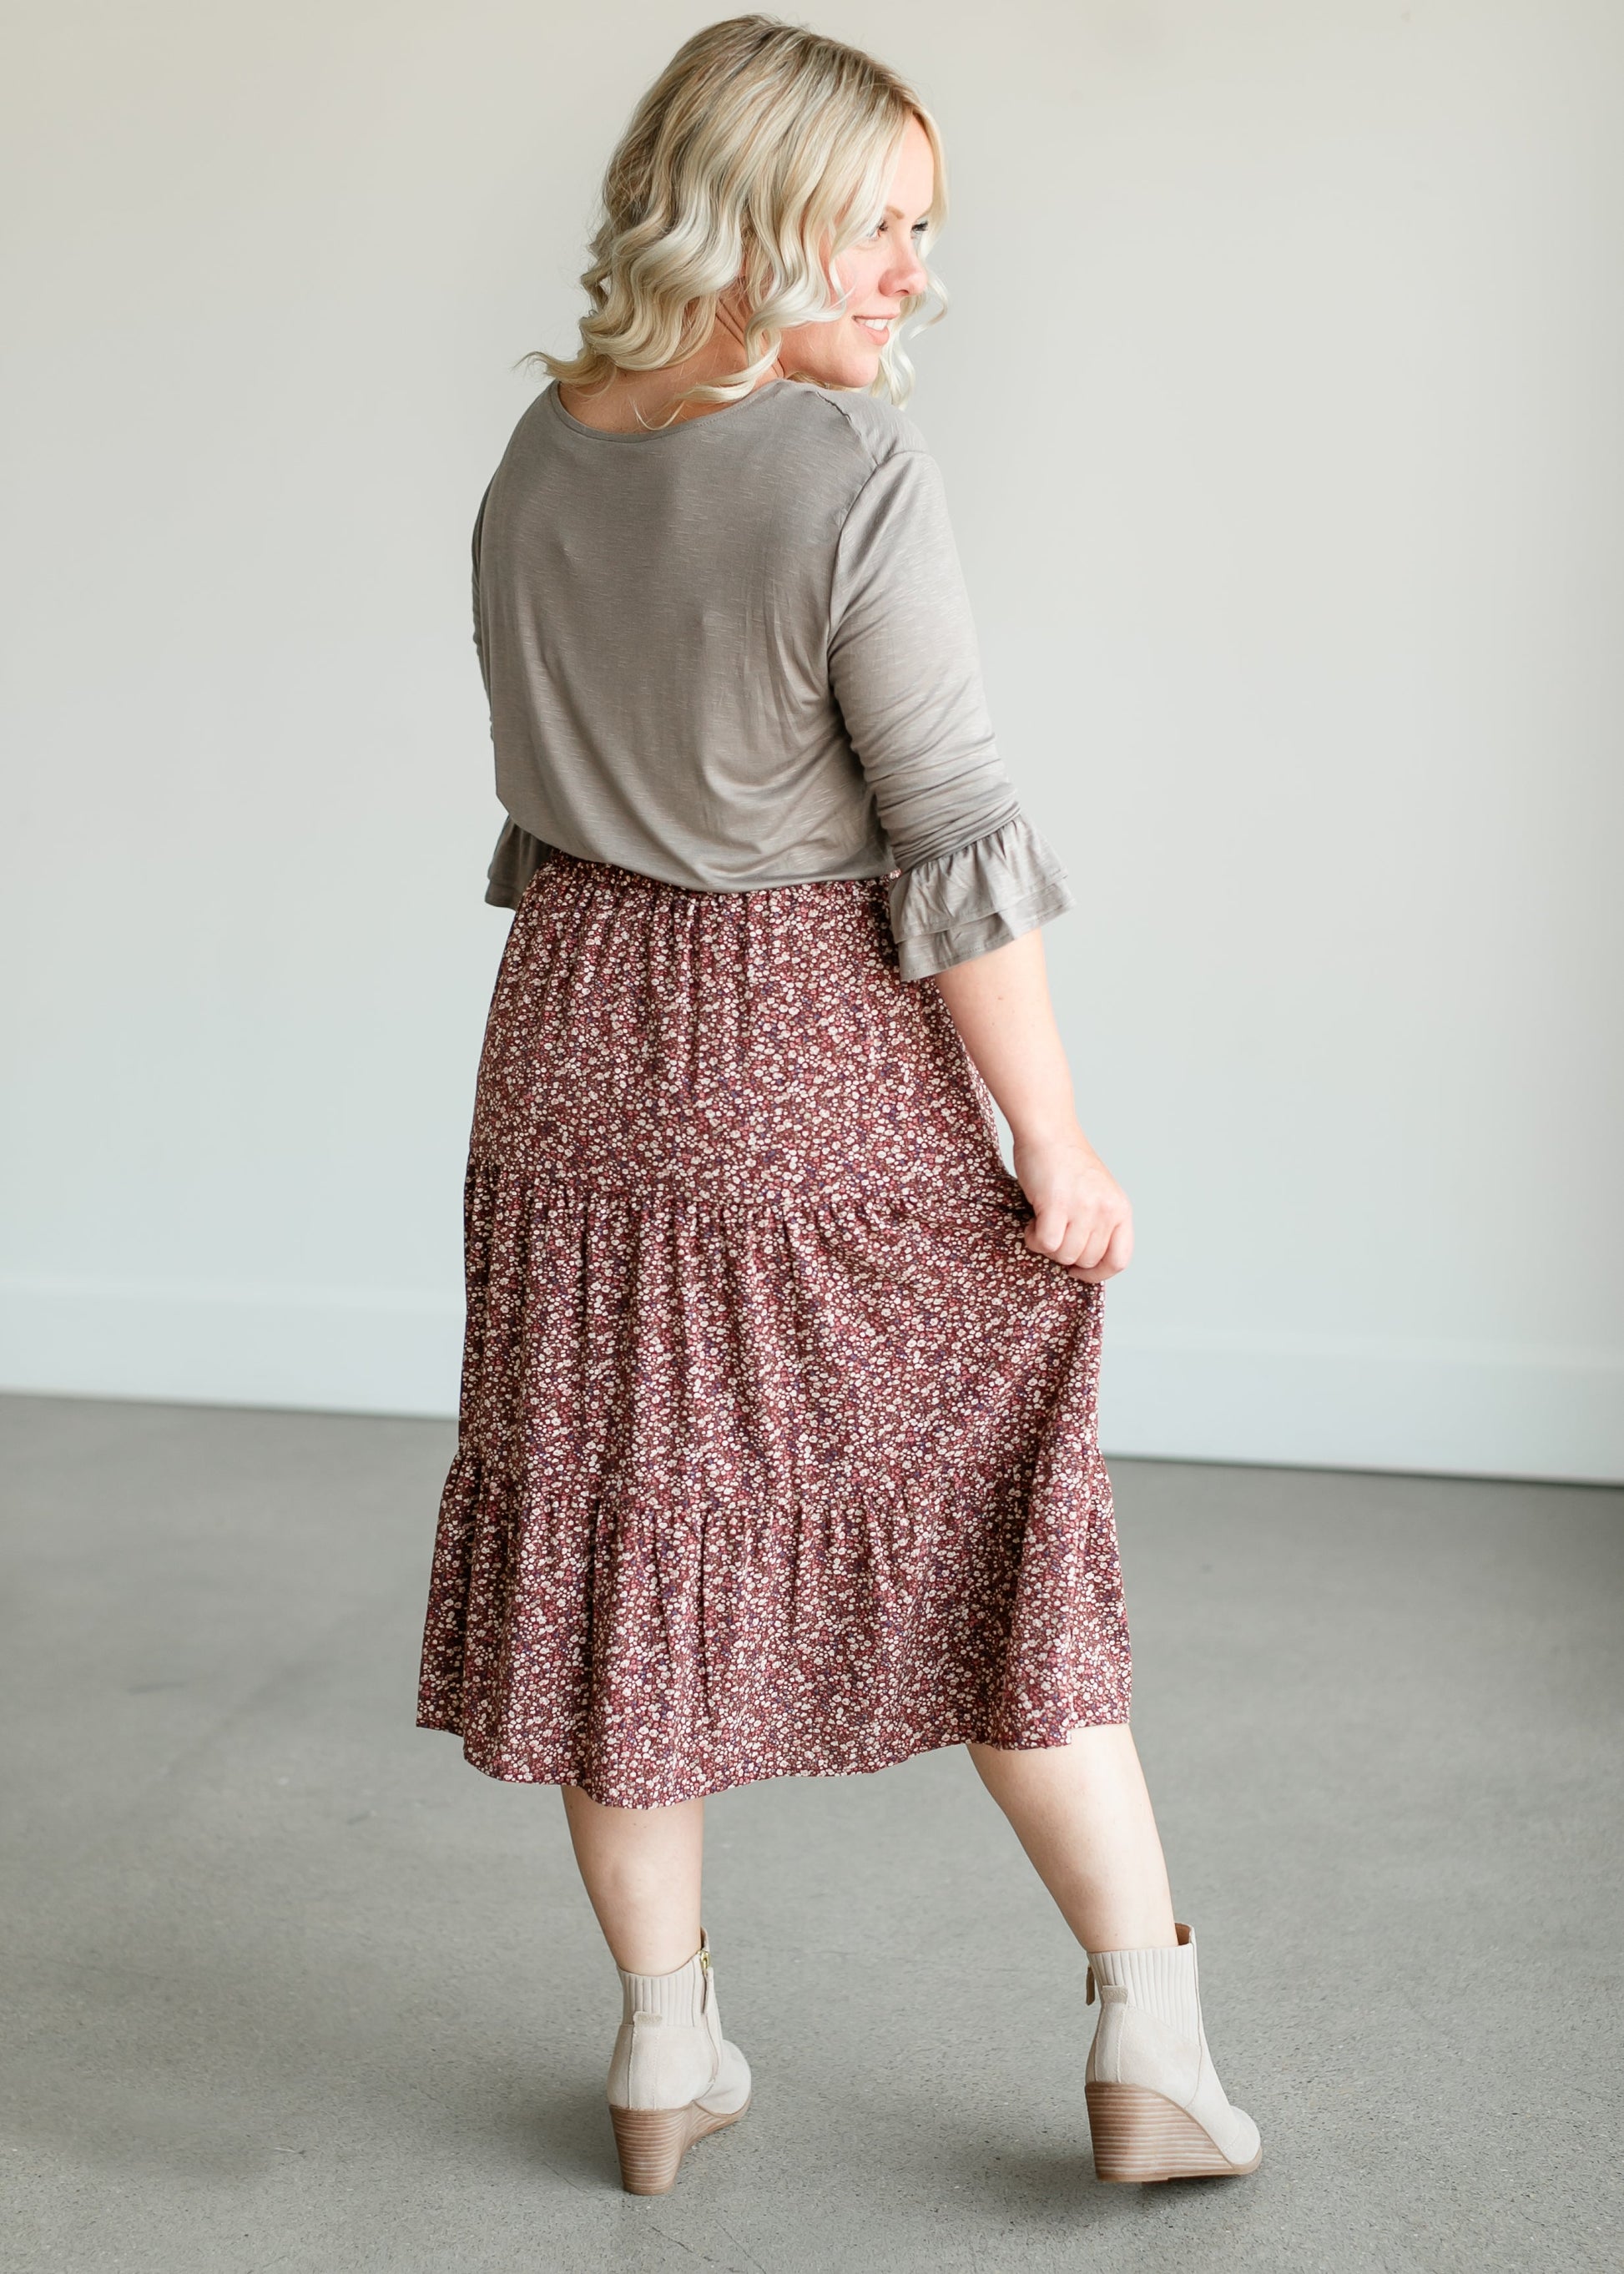 Harlow Floral Tiered Midi Skirt IC Skirts